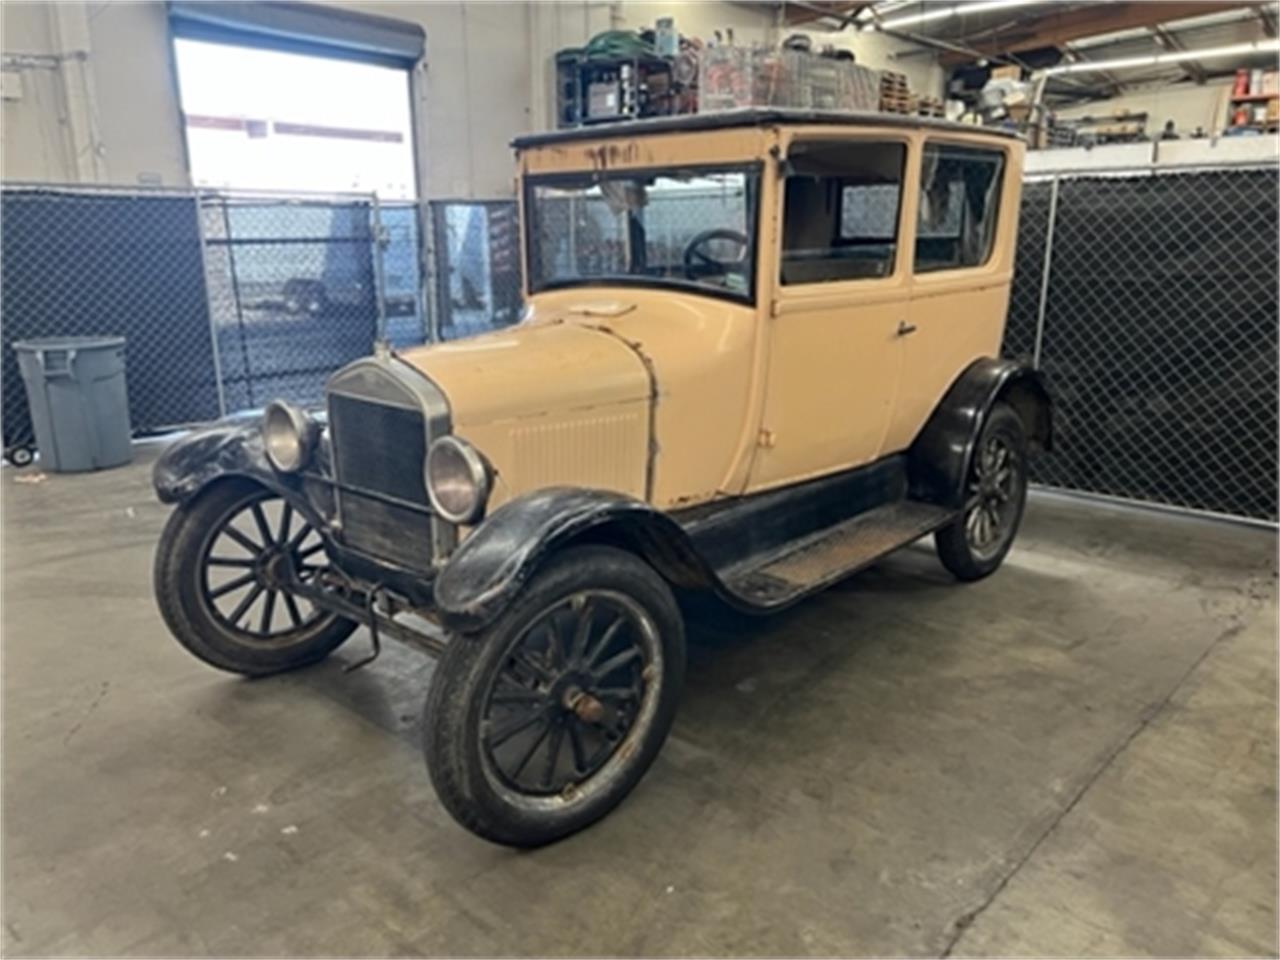 For Sale: 1926 Ford Model T in North Hollywood, California for sale in North Hollywood, CA